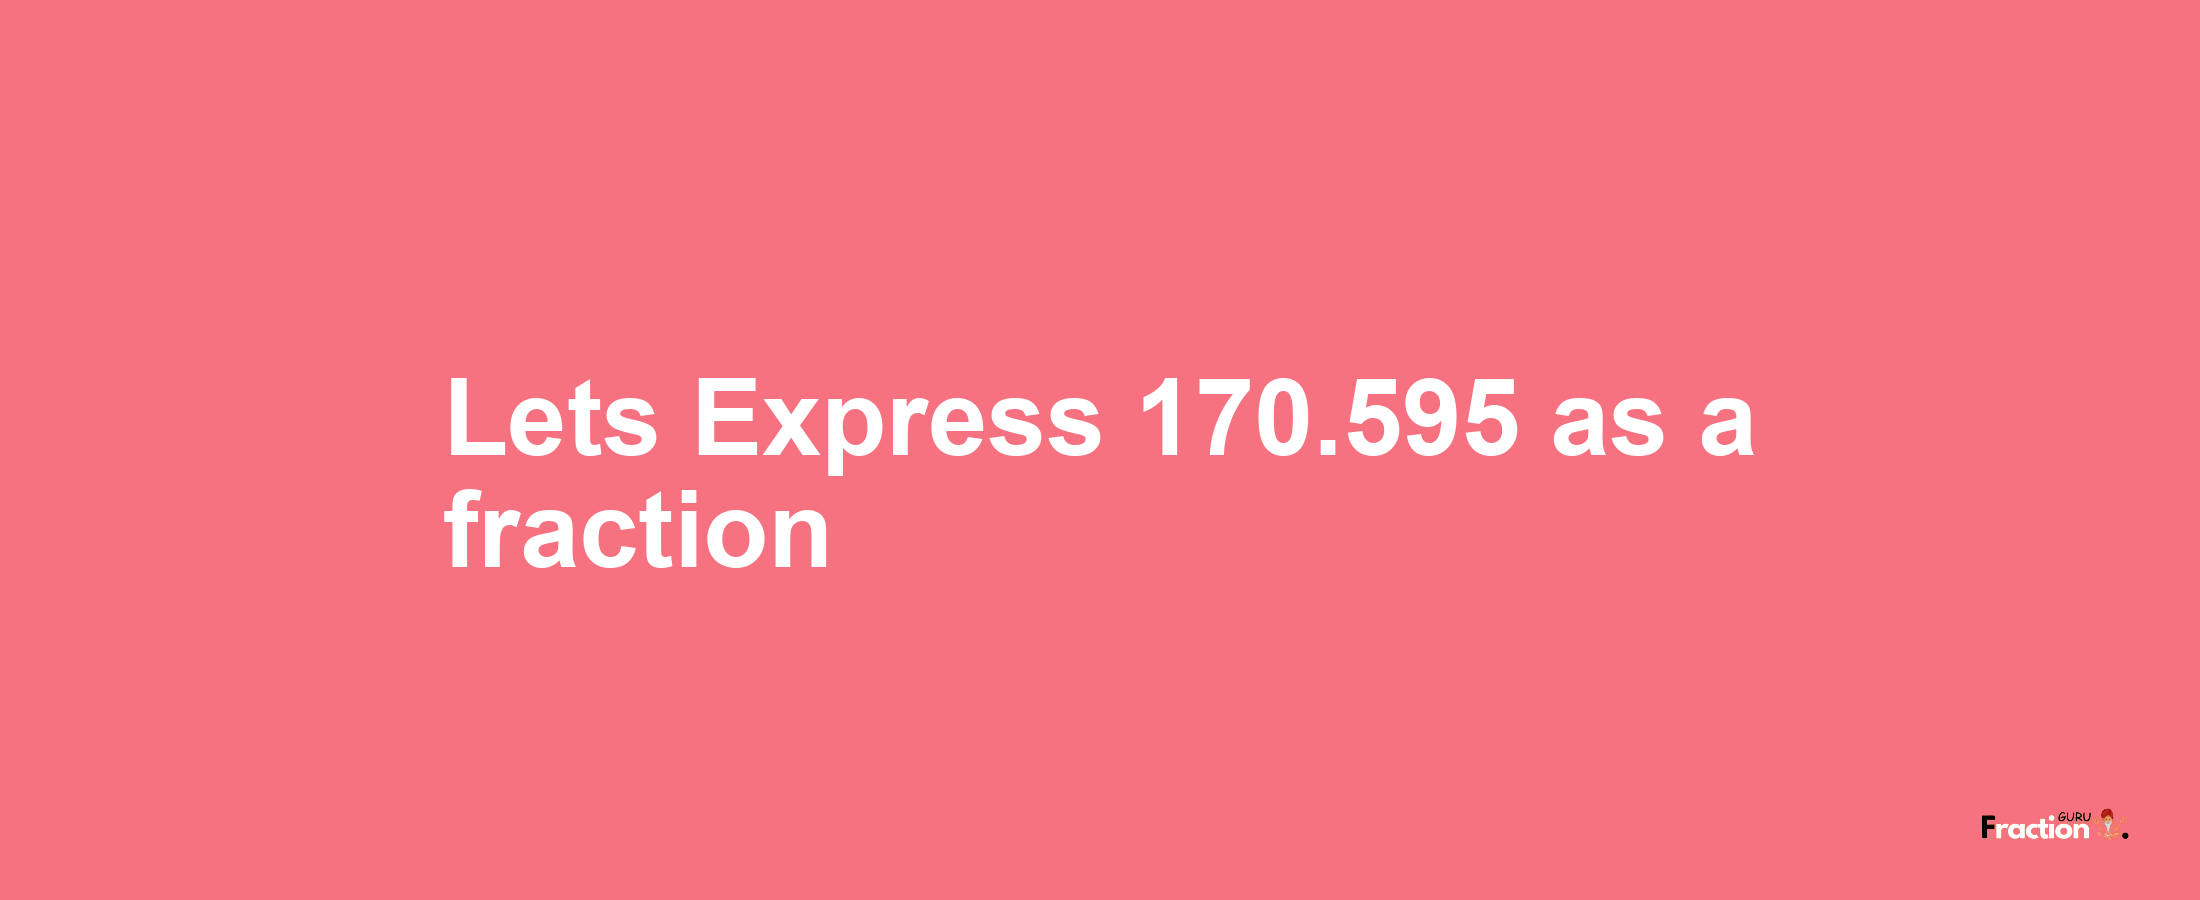 Lets Express 170.595 as afraction